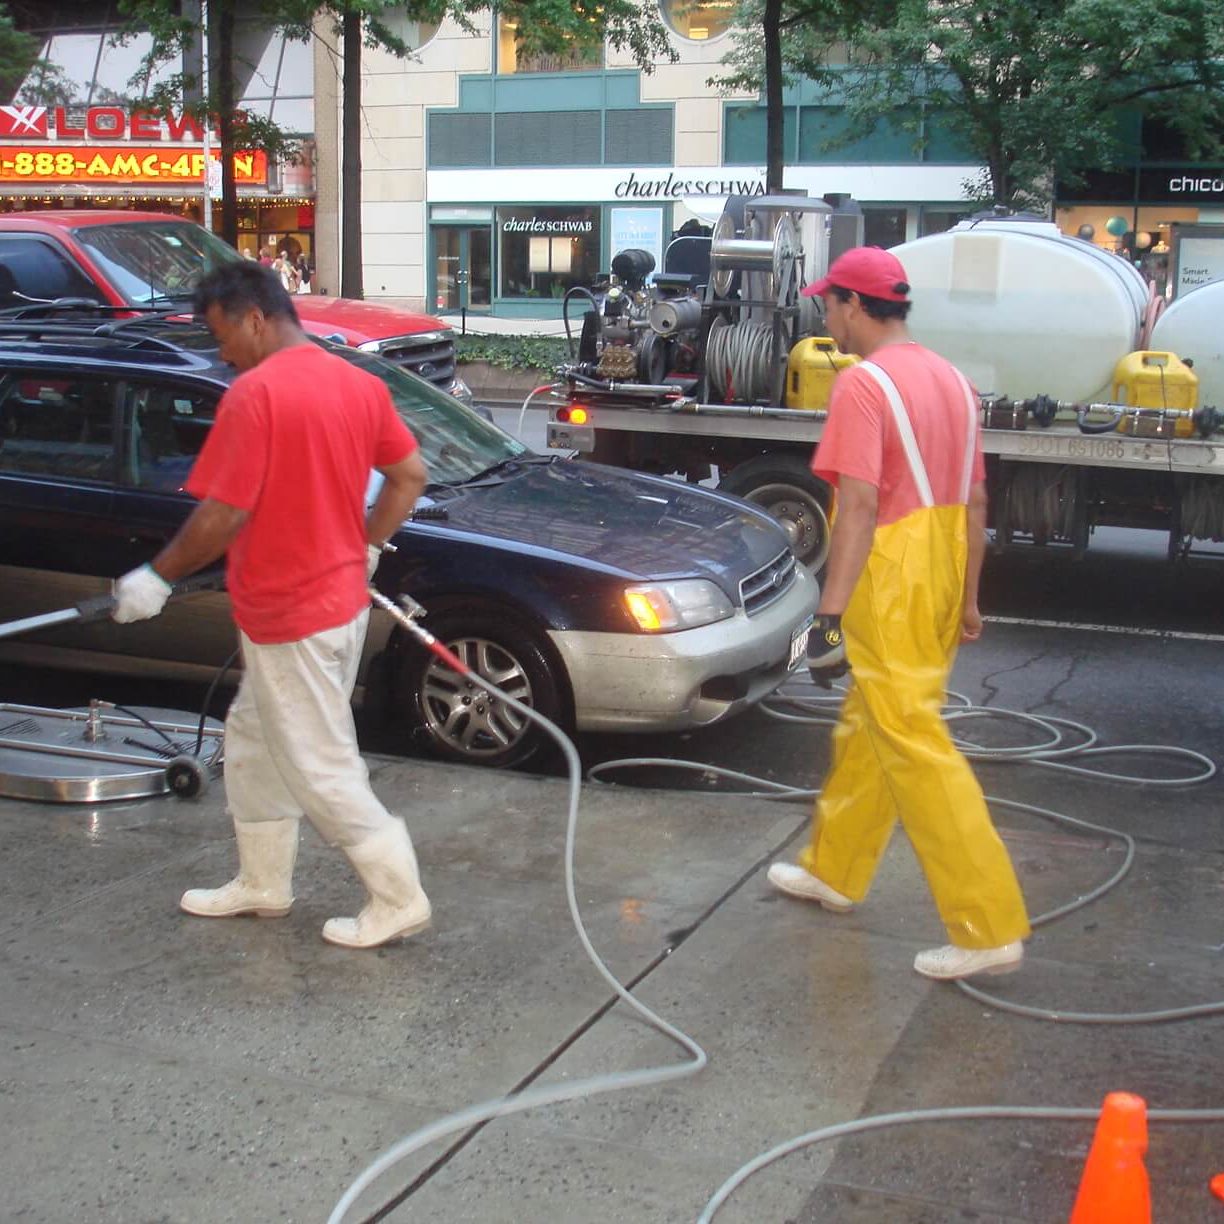 Hot Water Concrete Cleaning The answer to a better place of business can be as easy as clean concrete! Clean County is the Tri State area’s source for hardscapes that enhance your entire property. Clean Concrete Equals Better Business We make it our job to stop dirty concrete in its tracks. High-traffic properties tend to accumulate a lot of wear and tear, and your hardscapes are the first to show it. The Clean County technicians combat that with: Chewing Gum Removal Stain Removal Grease, oil, and dirt removal No amount of grime is a match for our concrete cleaning solution – and if your hardscapes are especially dirty, don’t sweat it. We are up for the challenge.